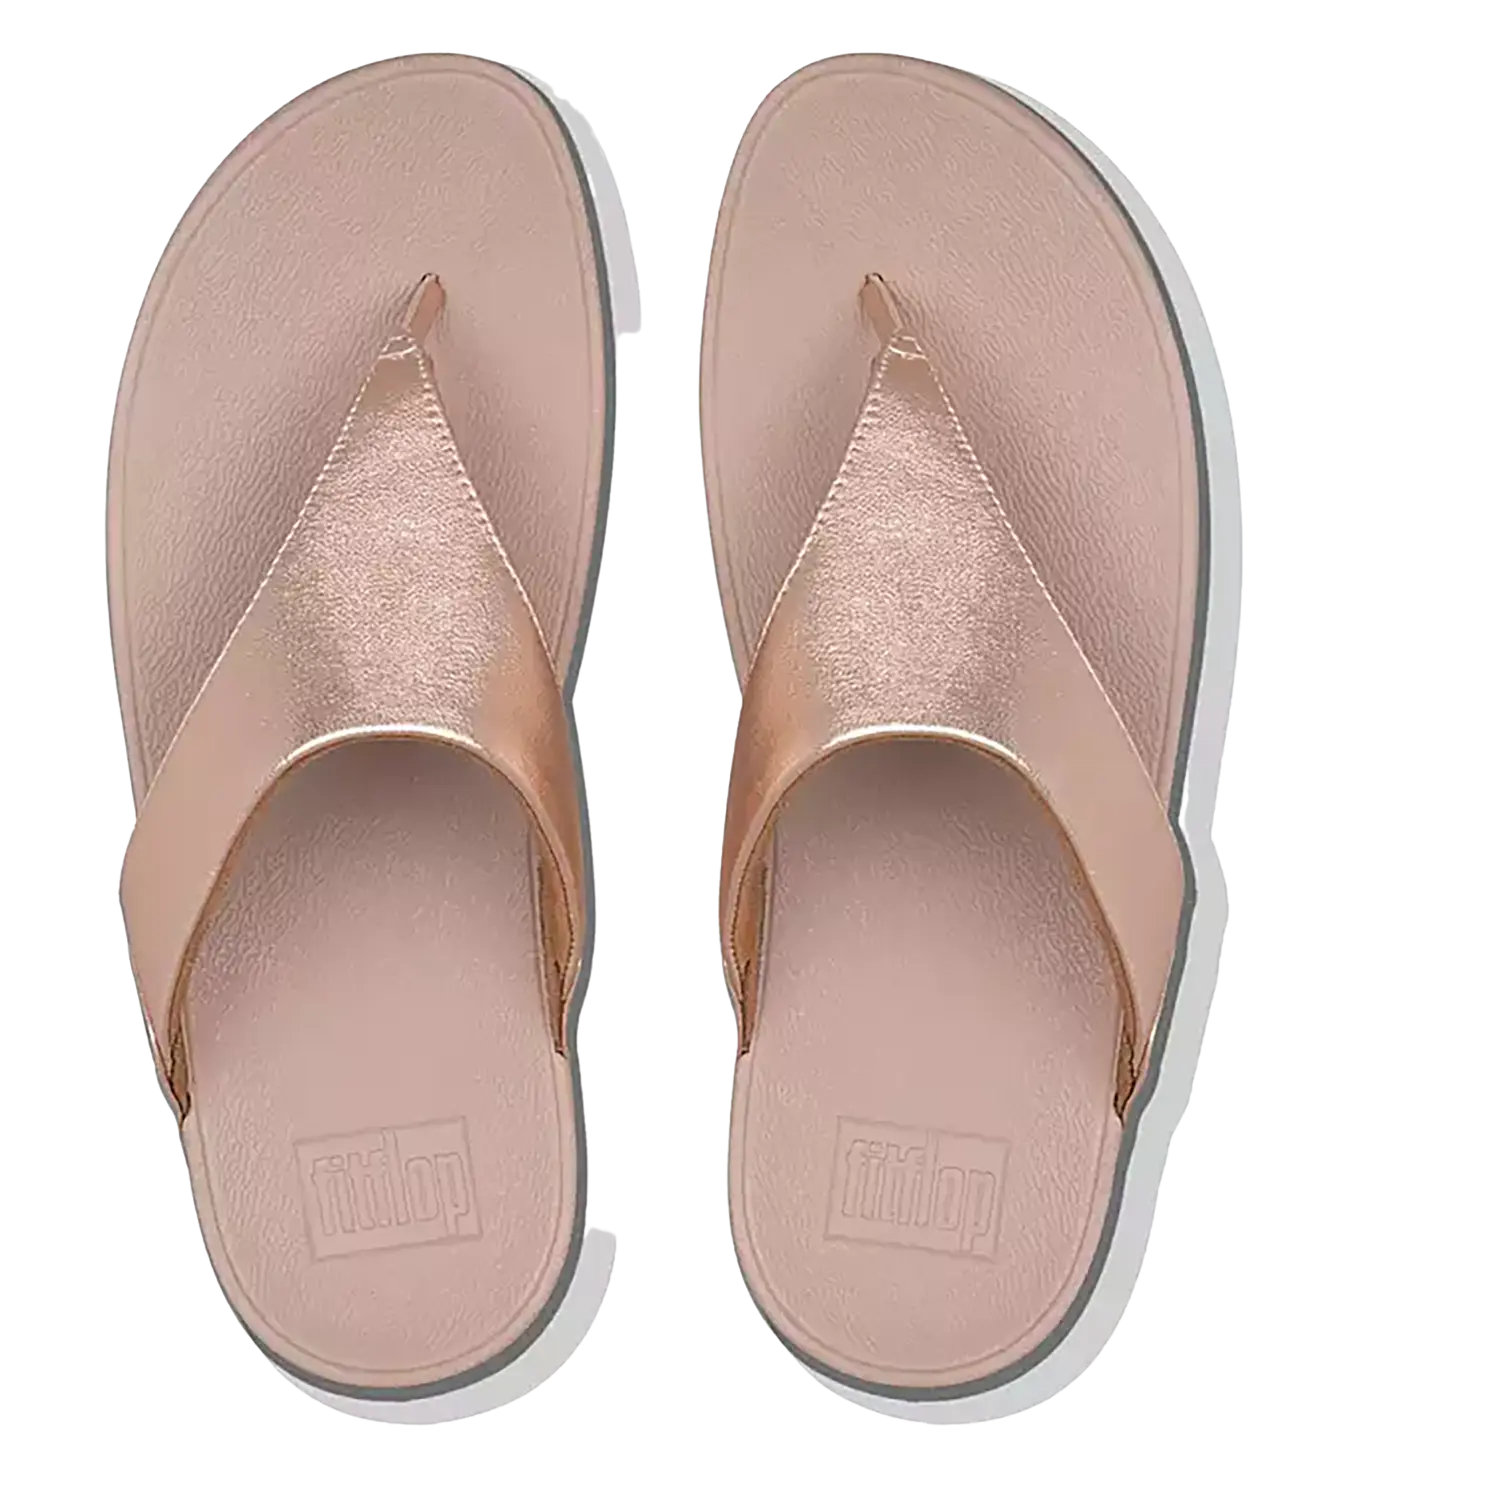 Fitflop's pool sliders that have been described as 'like yoga for